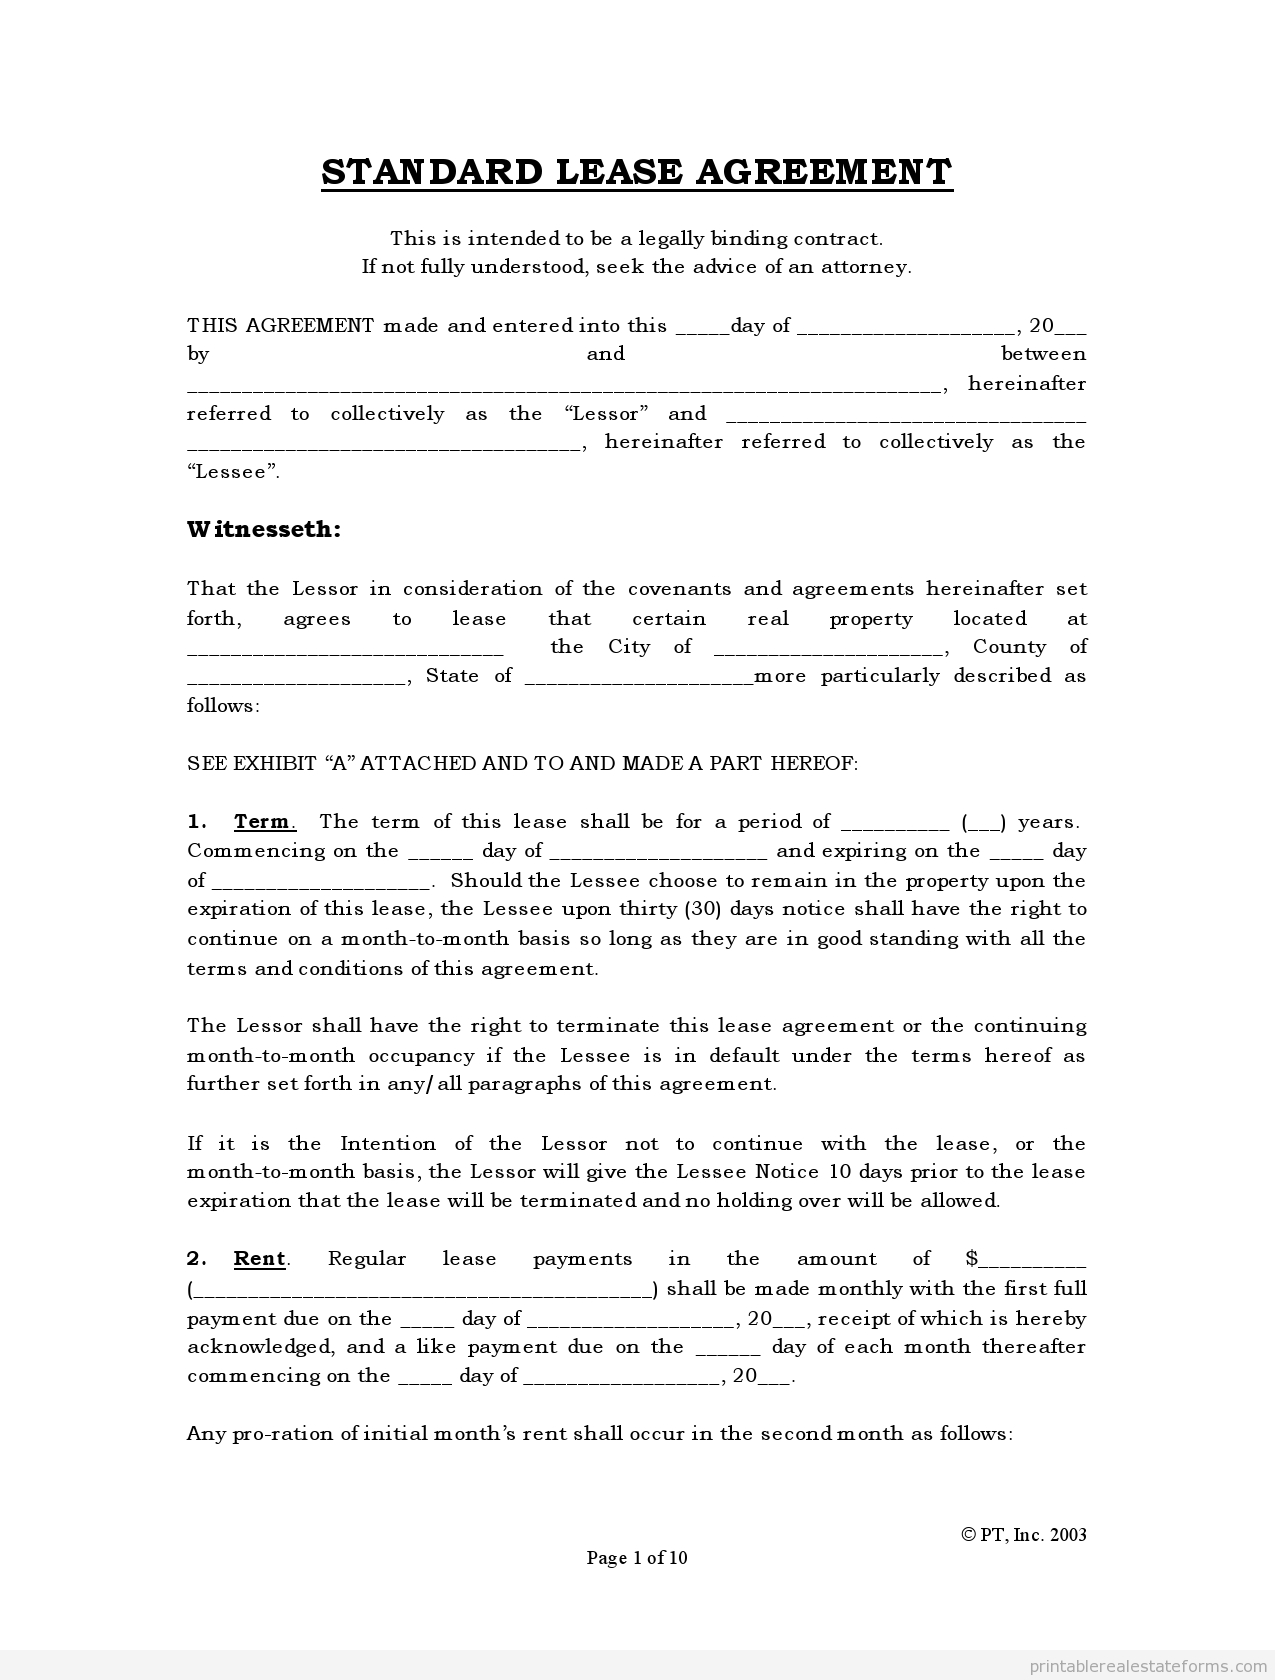 Free Rental Agreements To Print | Free Standard Lease Agreement Form - Free Printable Landlord Forms